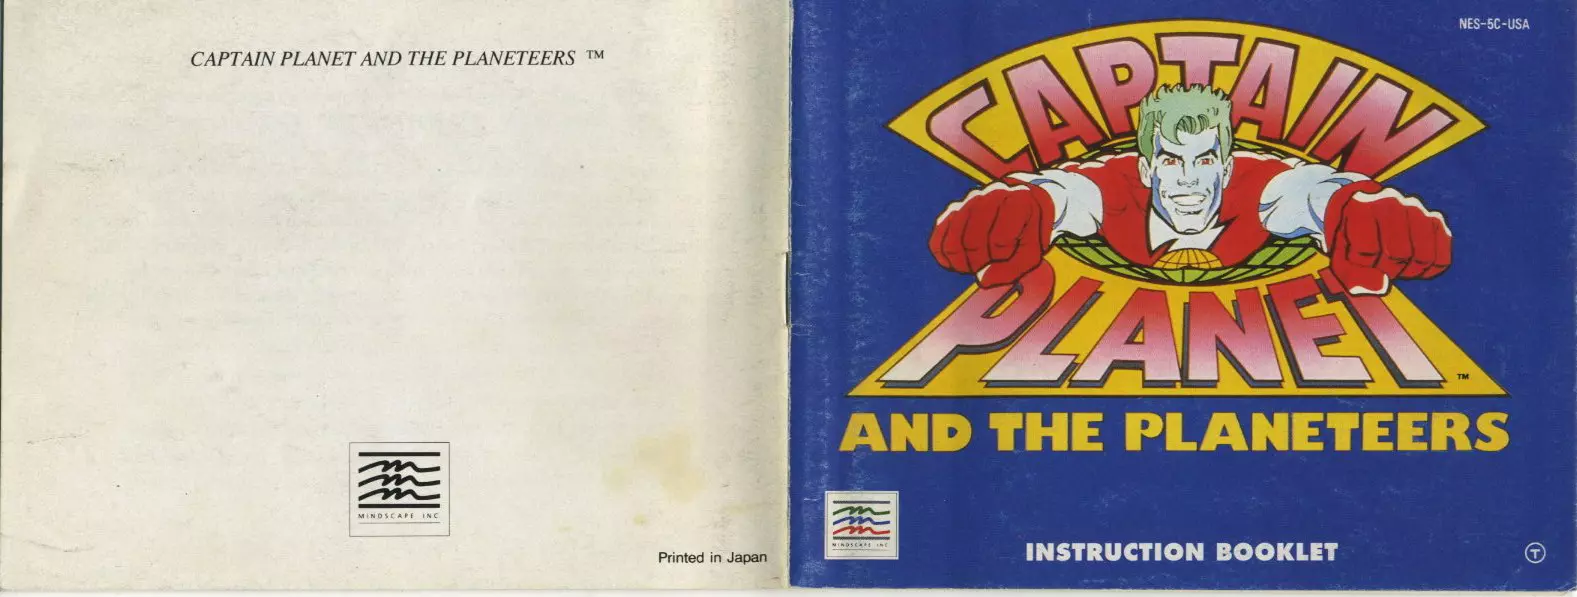 manual for Captain Planet and the Planeteers